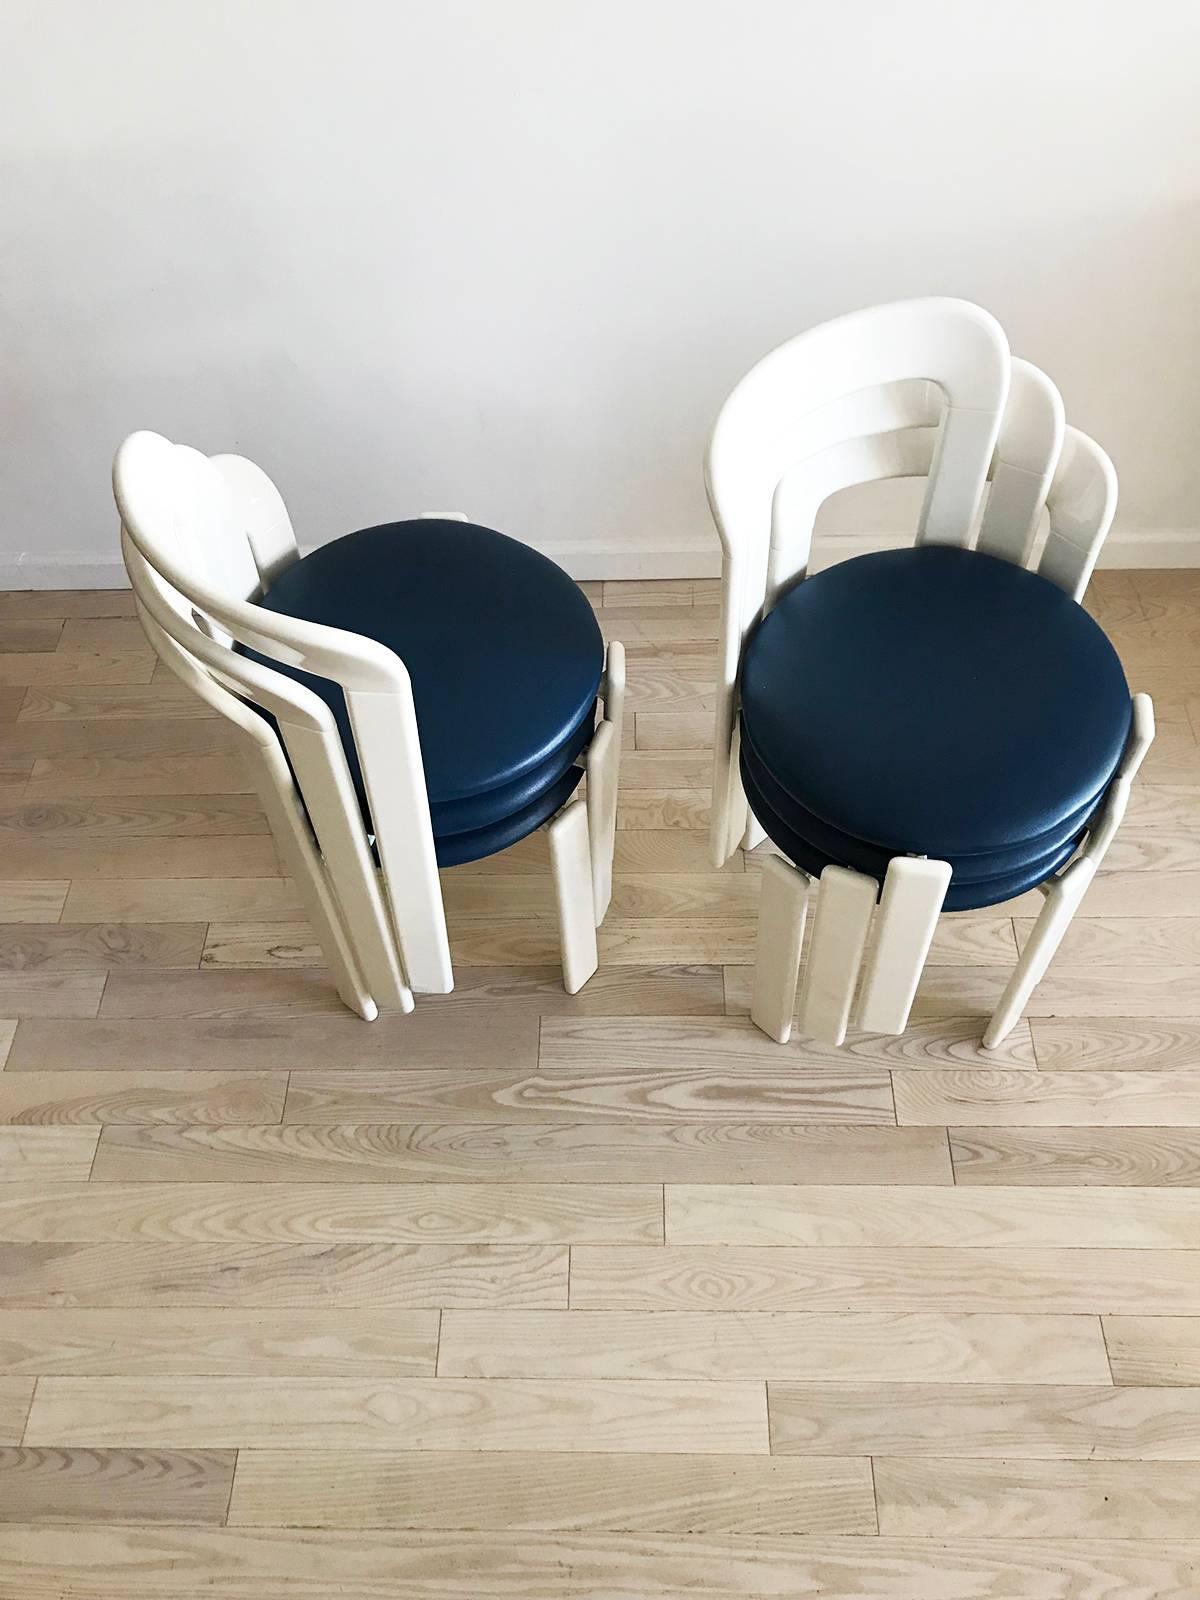 Set of six, 1970s Bruno Rey stacking chairs, from Switzerland. Shinny white laquared frames with blue vinyl padded seats in excellent condition.
   